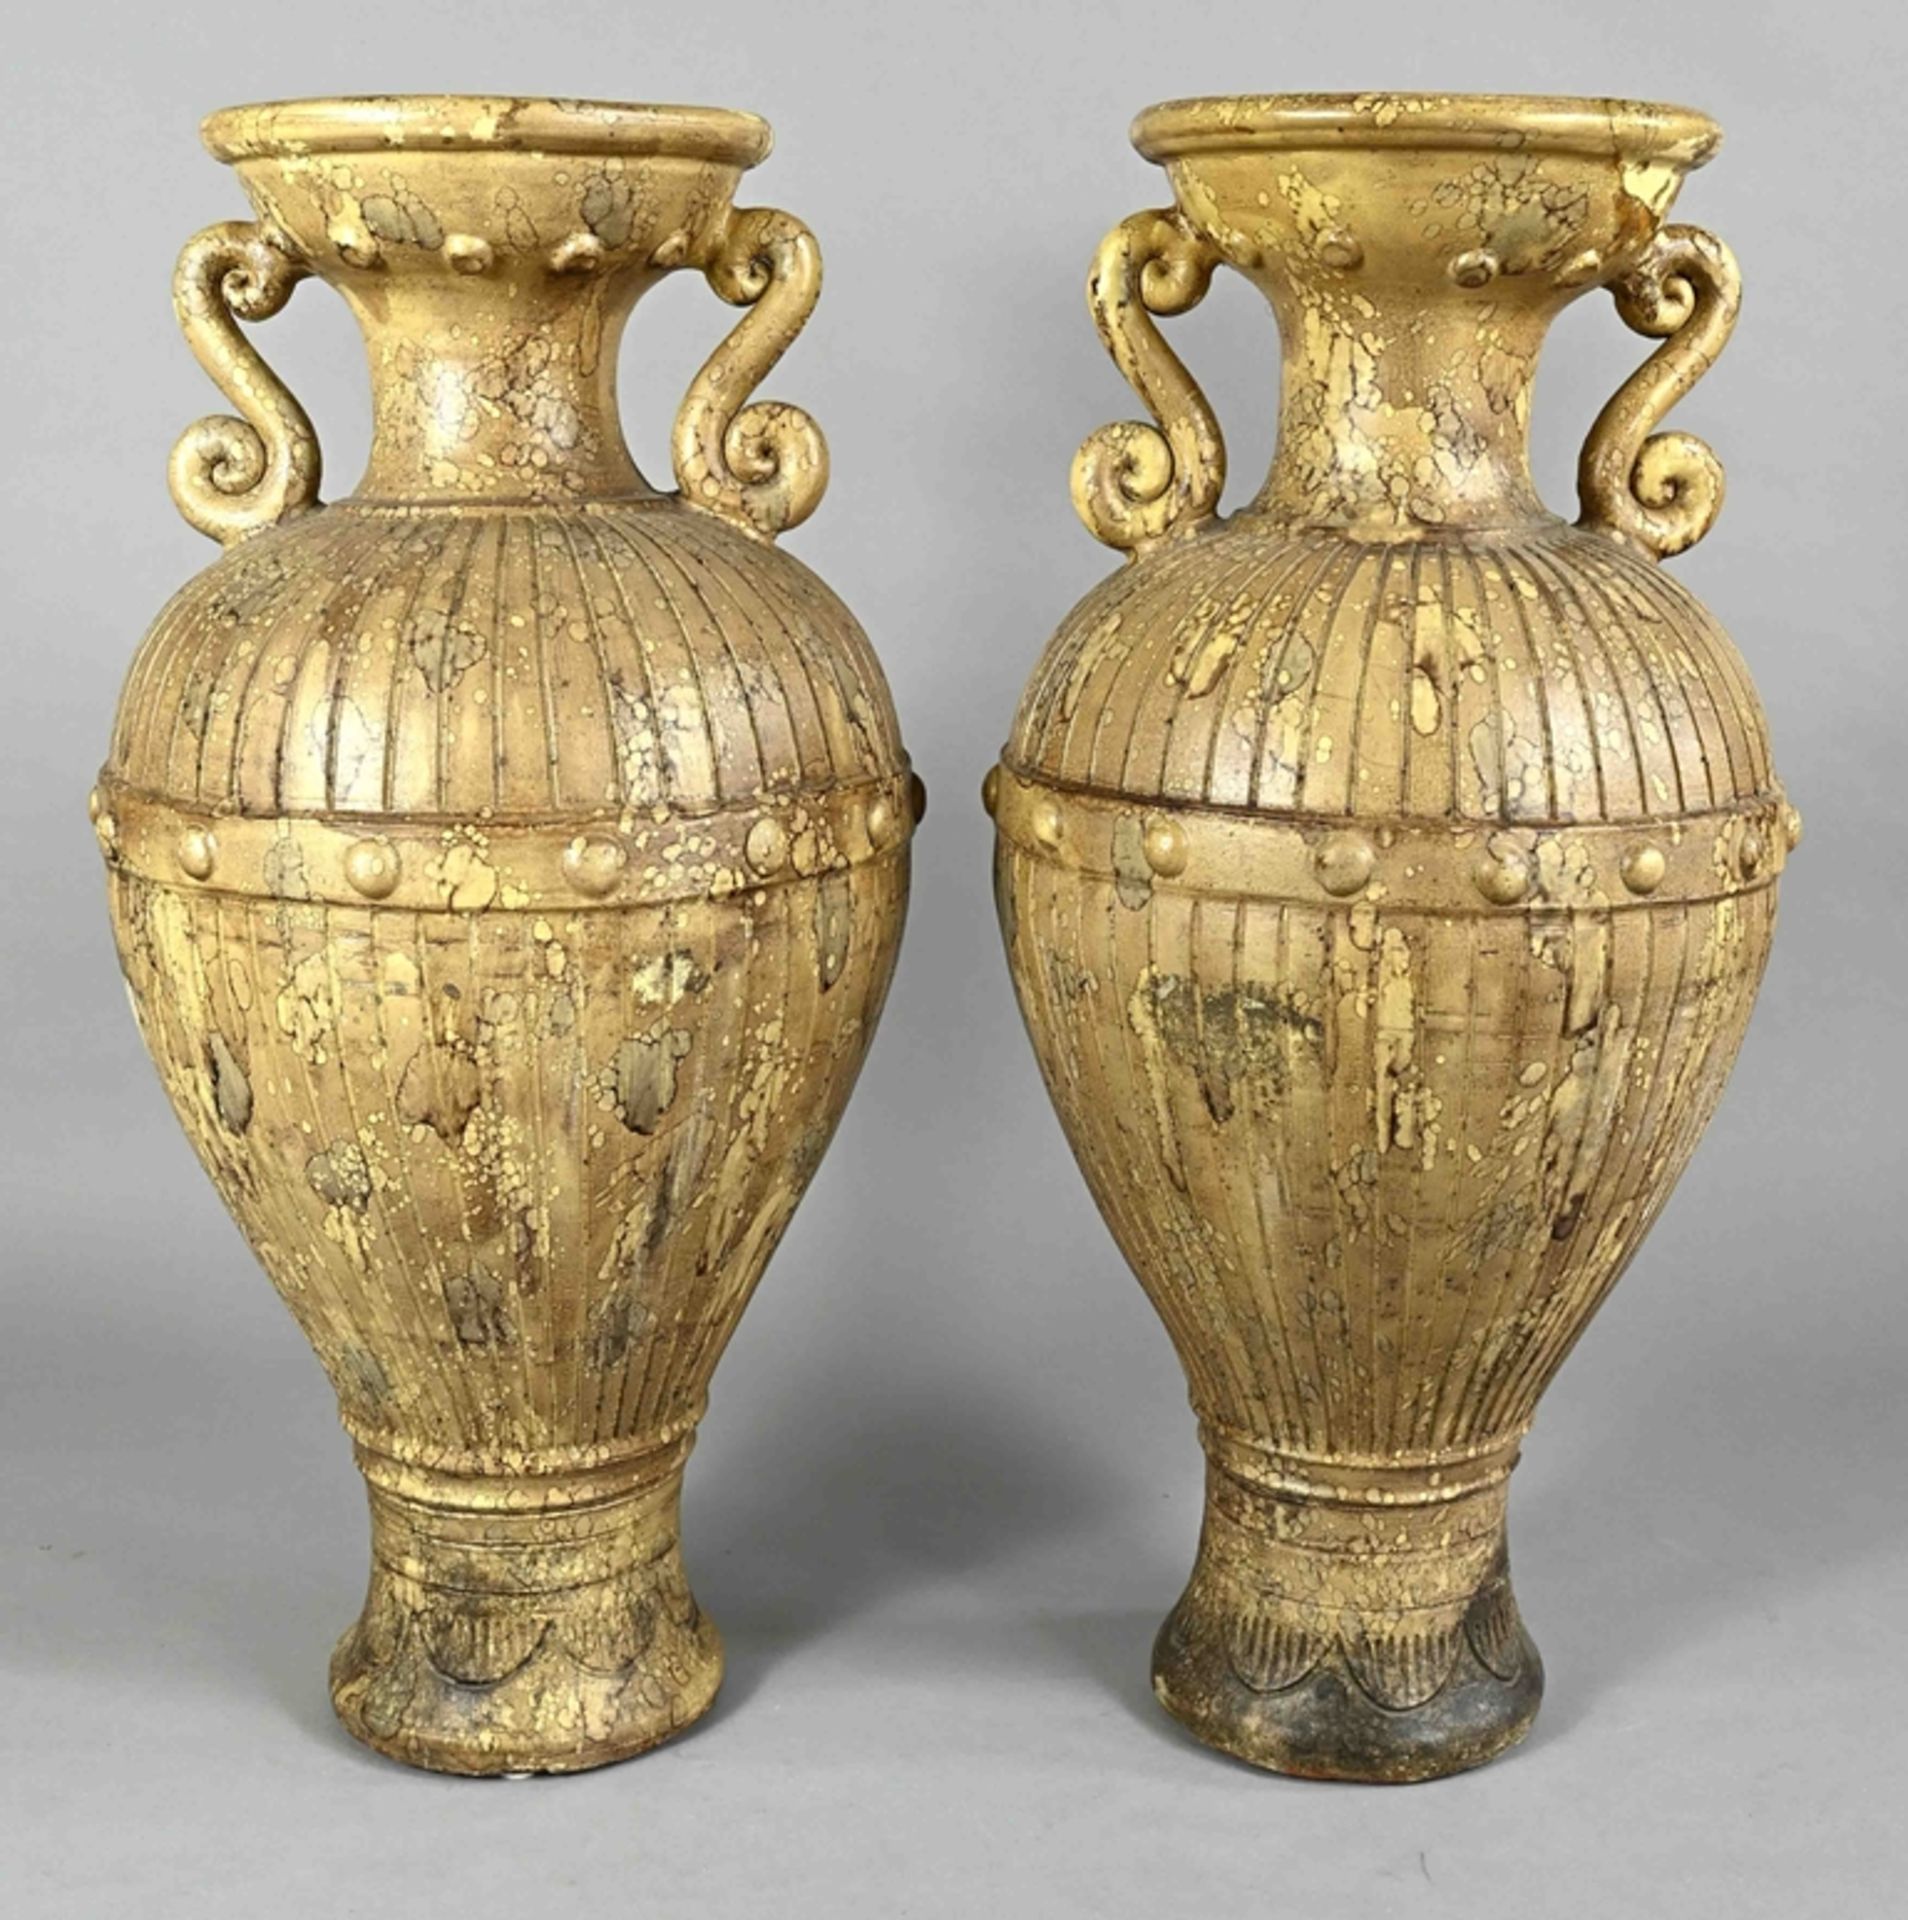 Pair of very decorative vases, amphorae, Greece/Italy, 1st half 20th century, terracotta, marbled, 